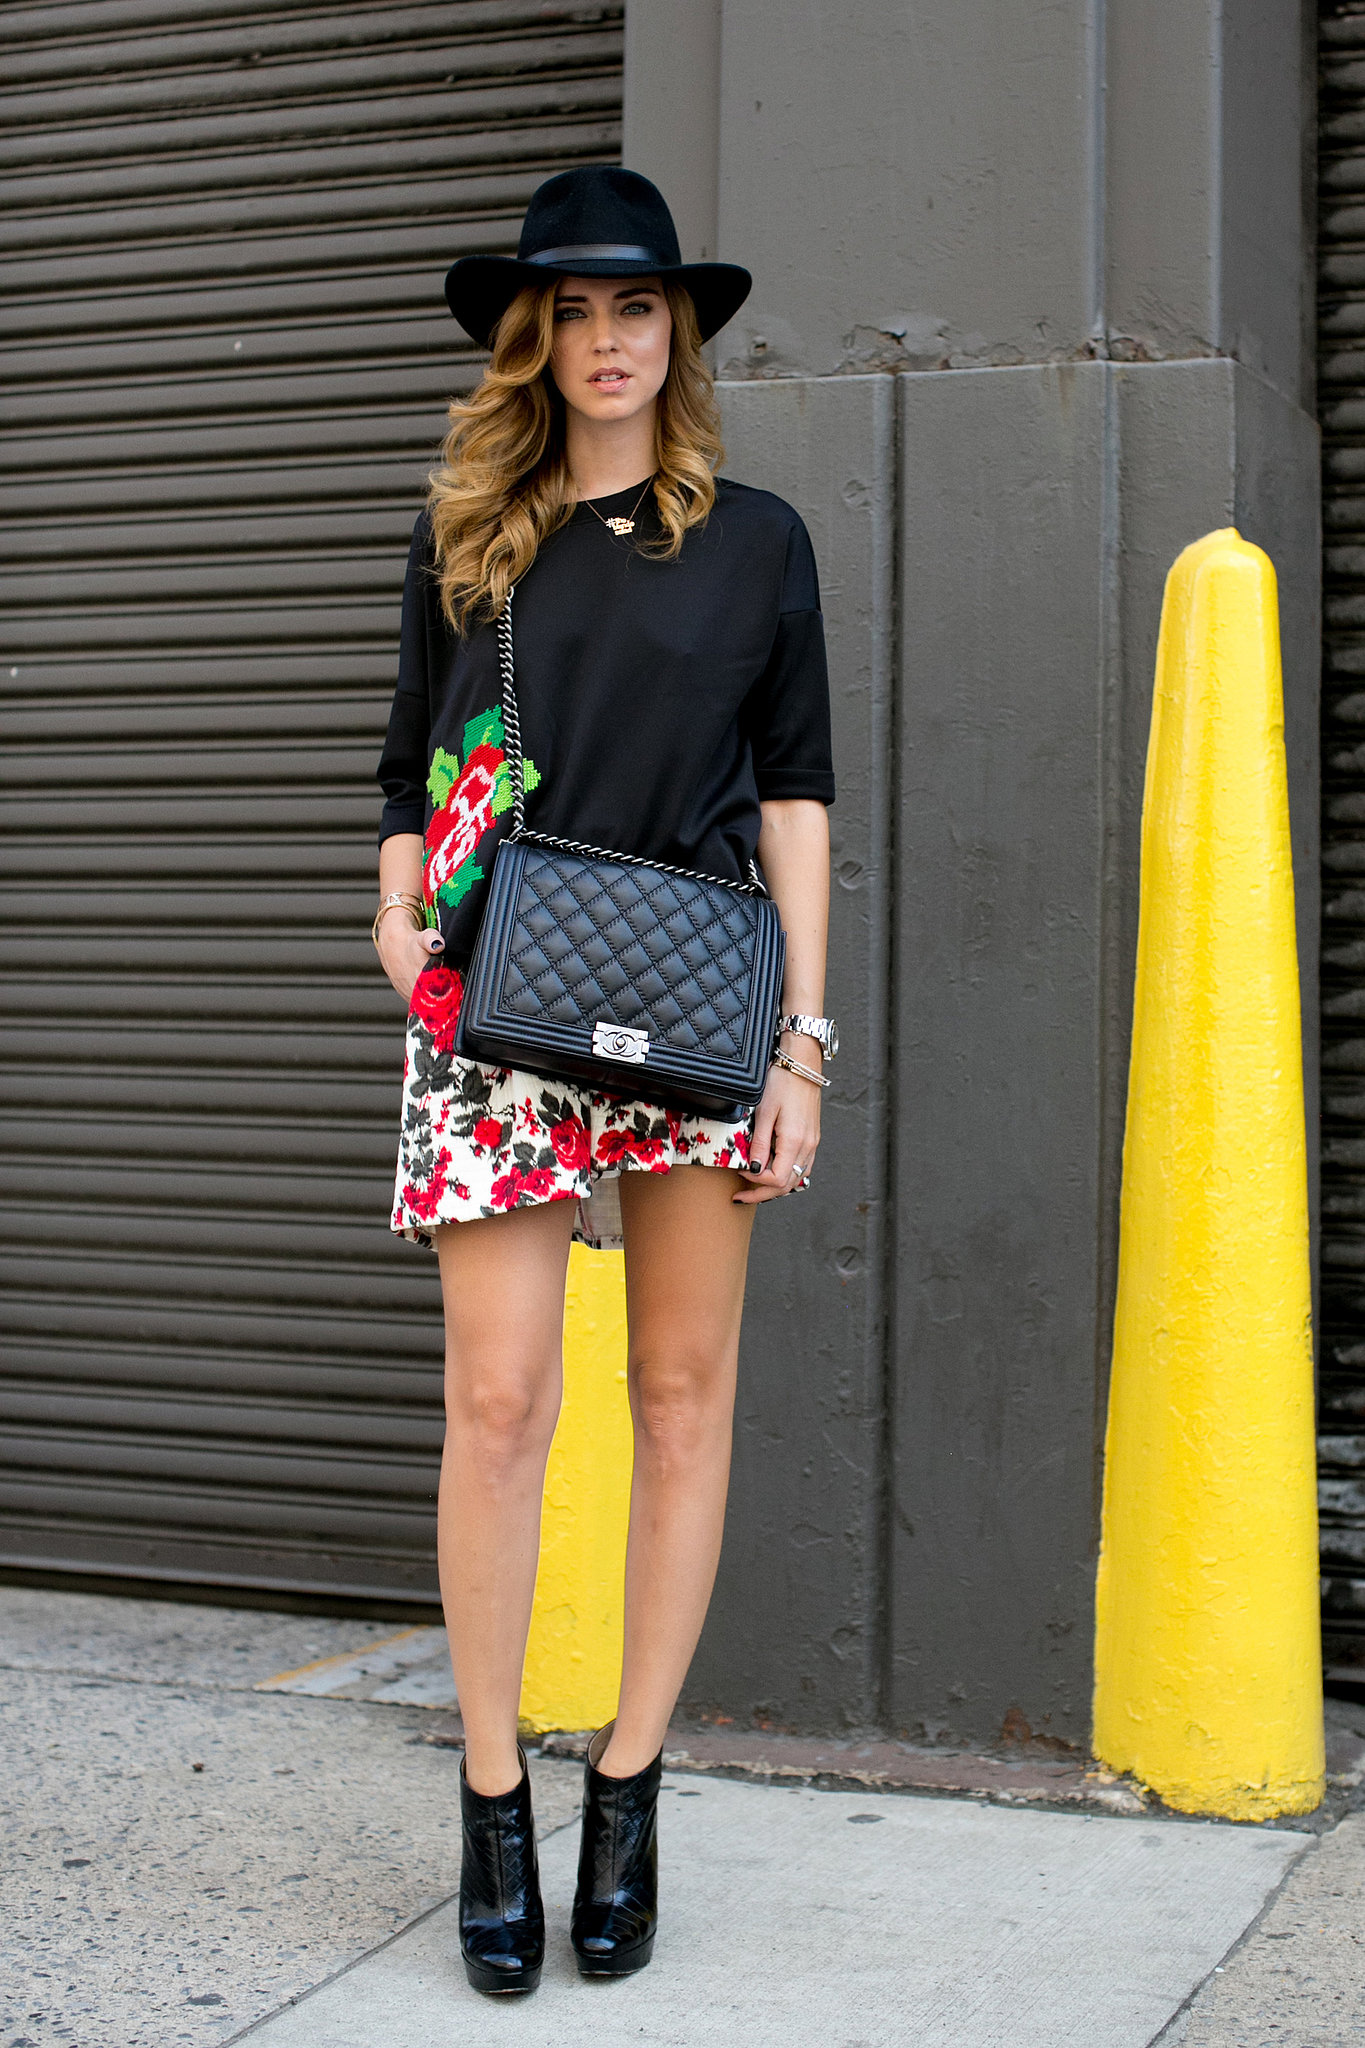 Chiara Ferragni was one part girlie-girl, one part boho in a wide-brim hat and florals.
